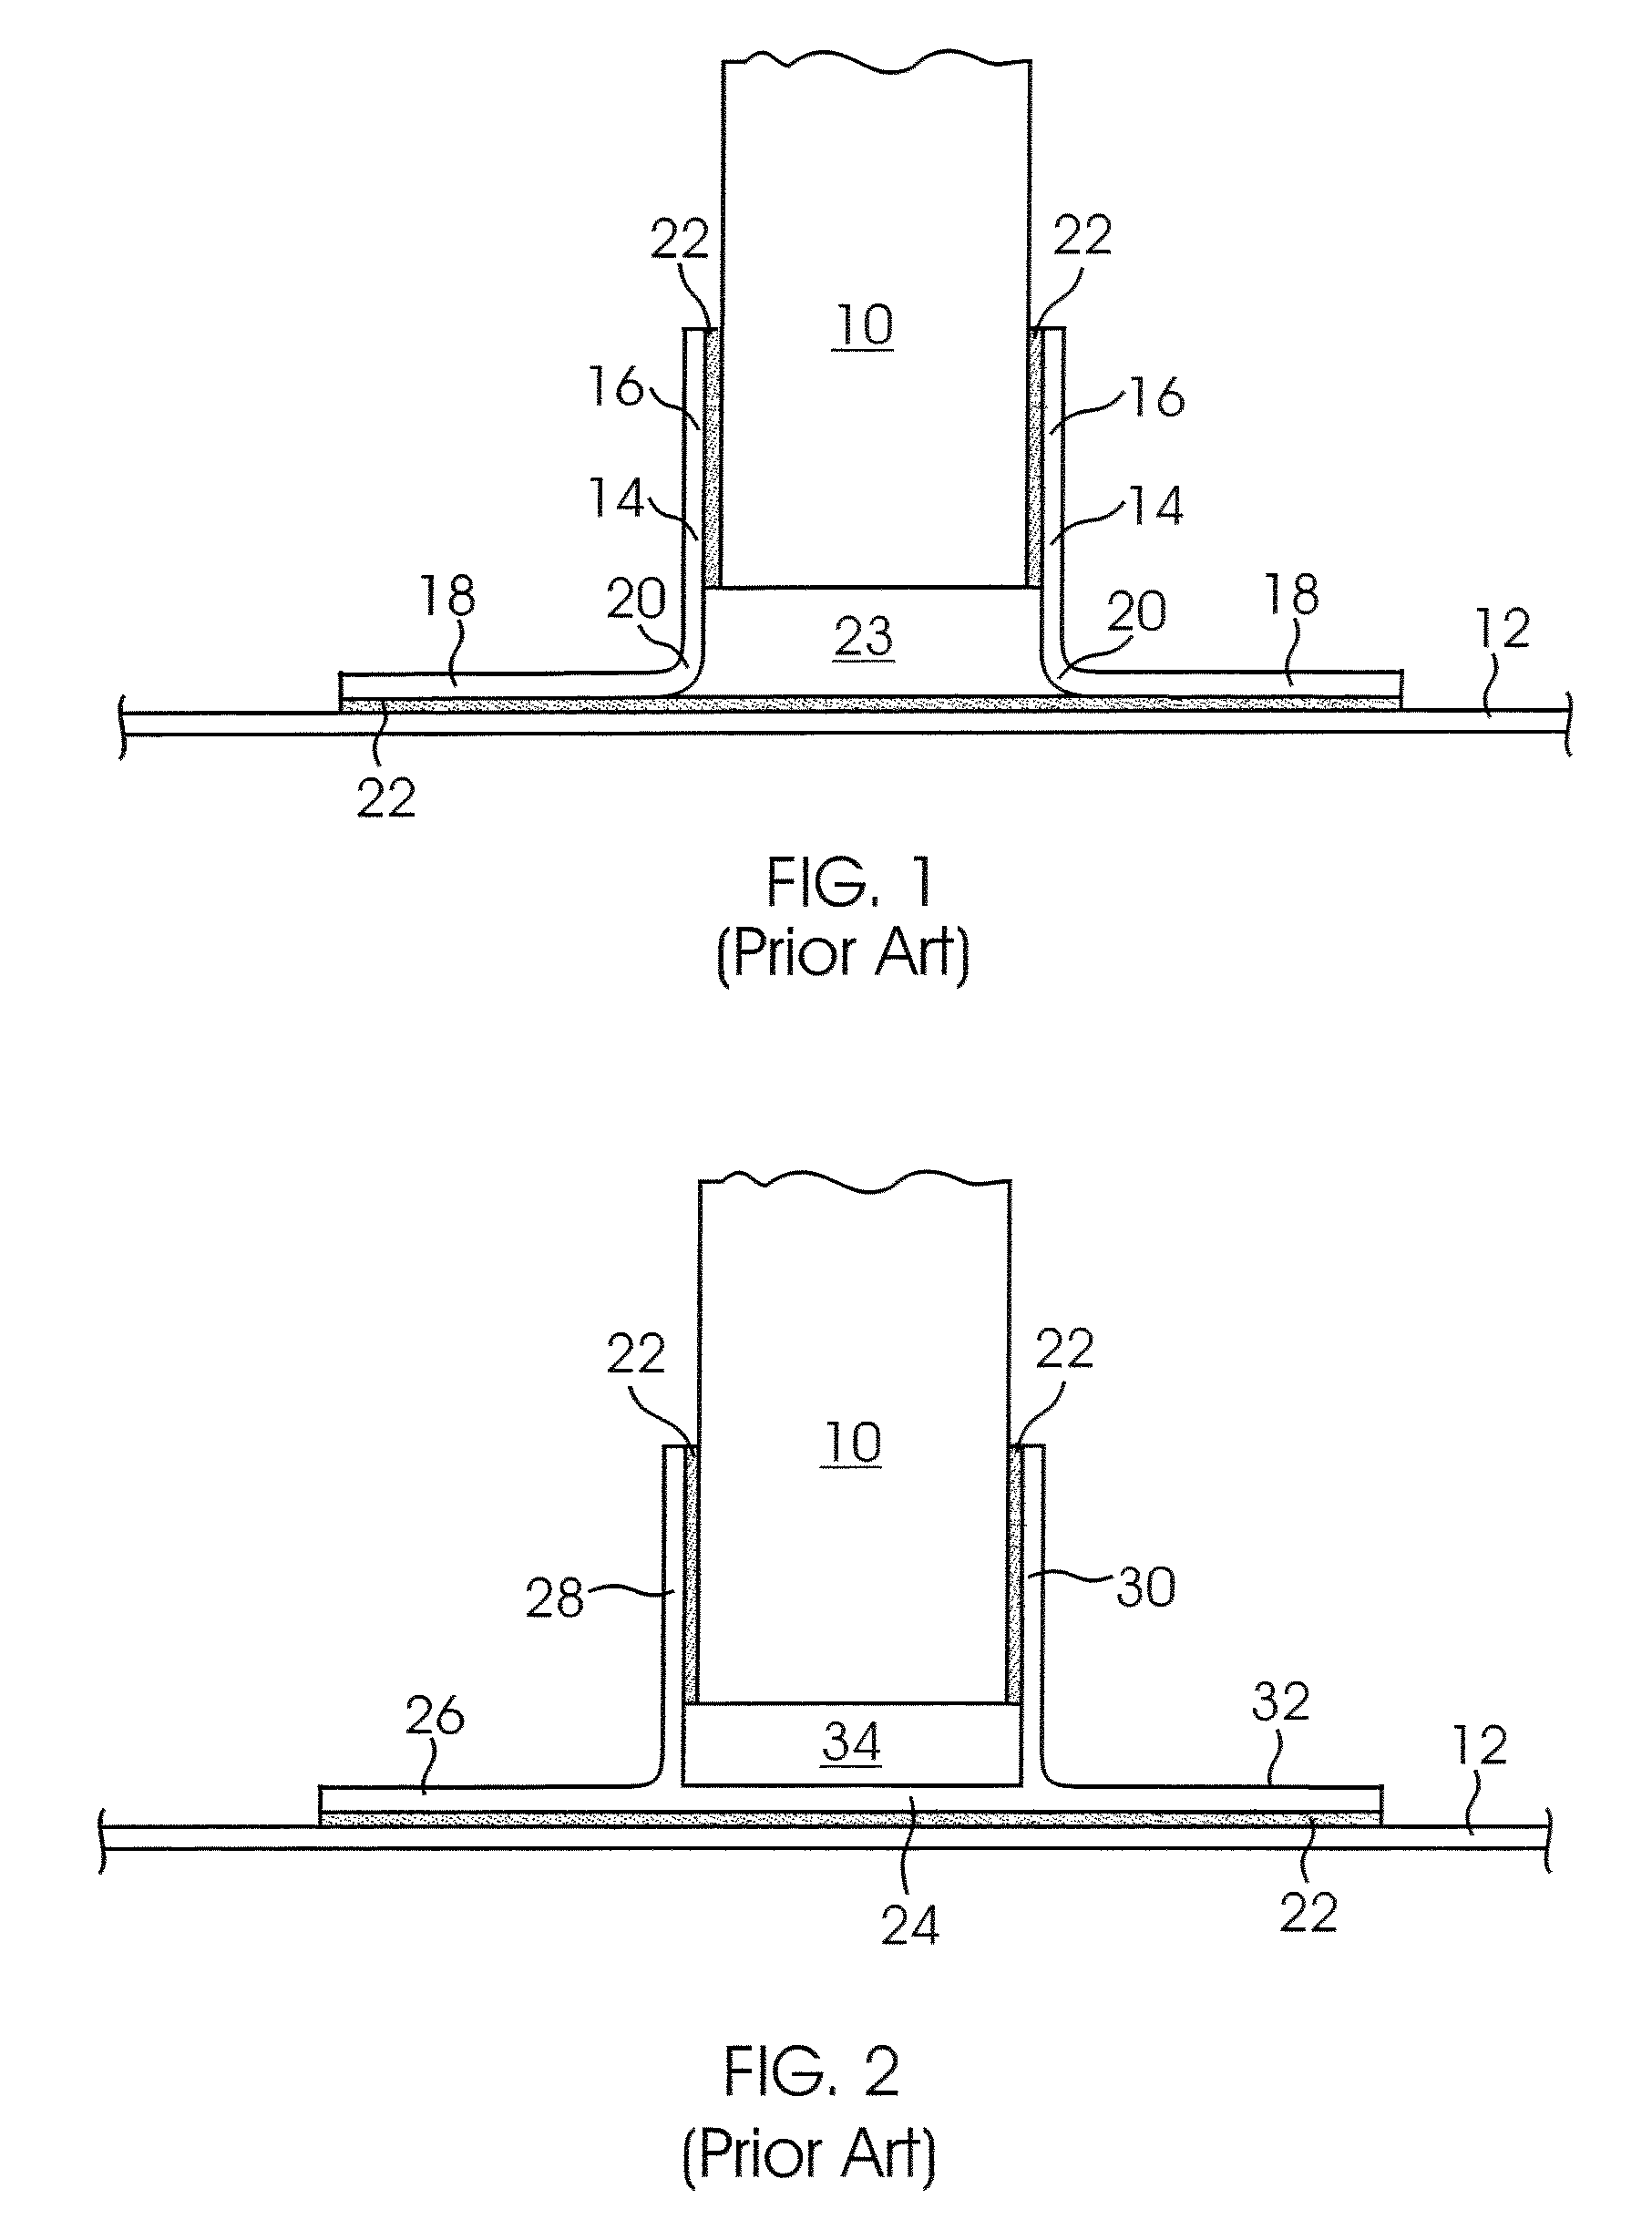 Apparatus and methods for securing a first structural member and a second structural member to one another